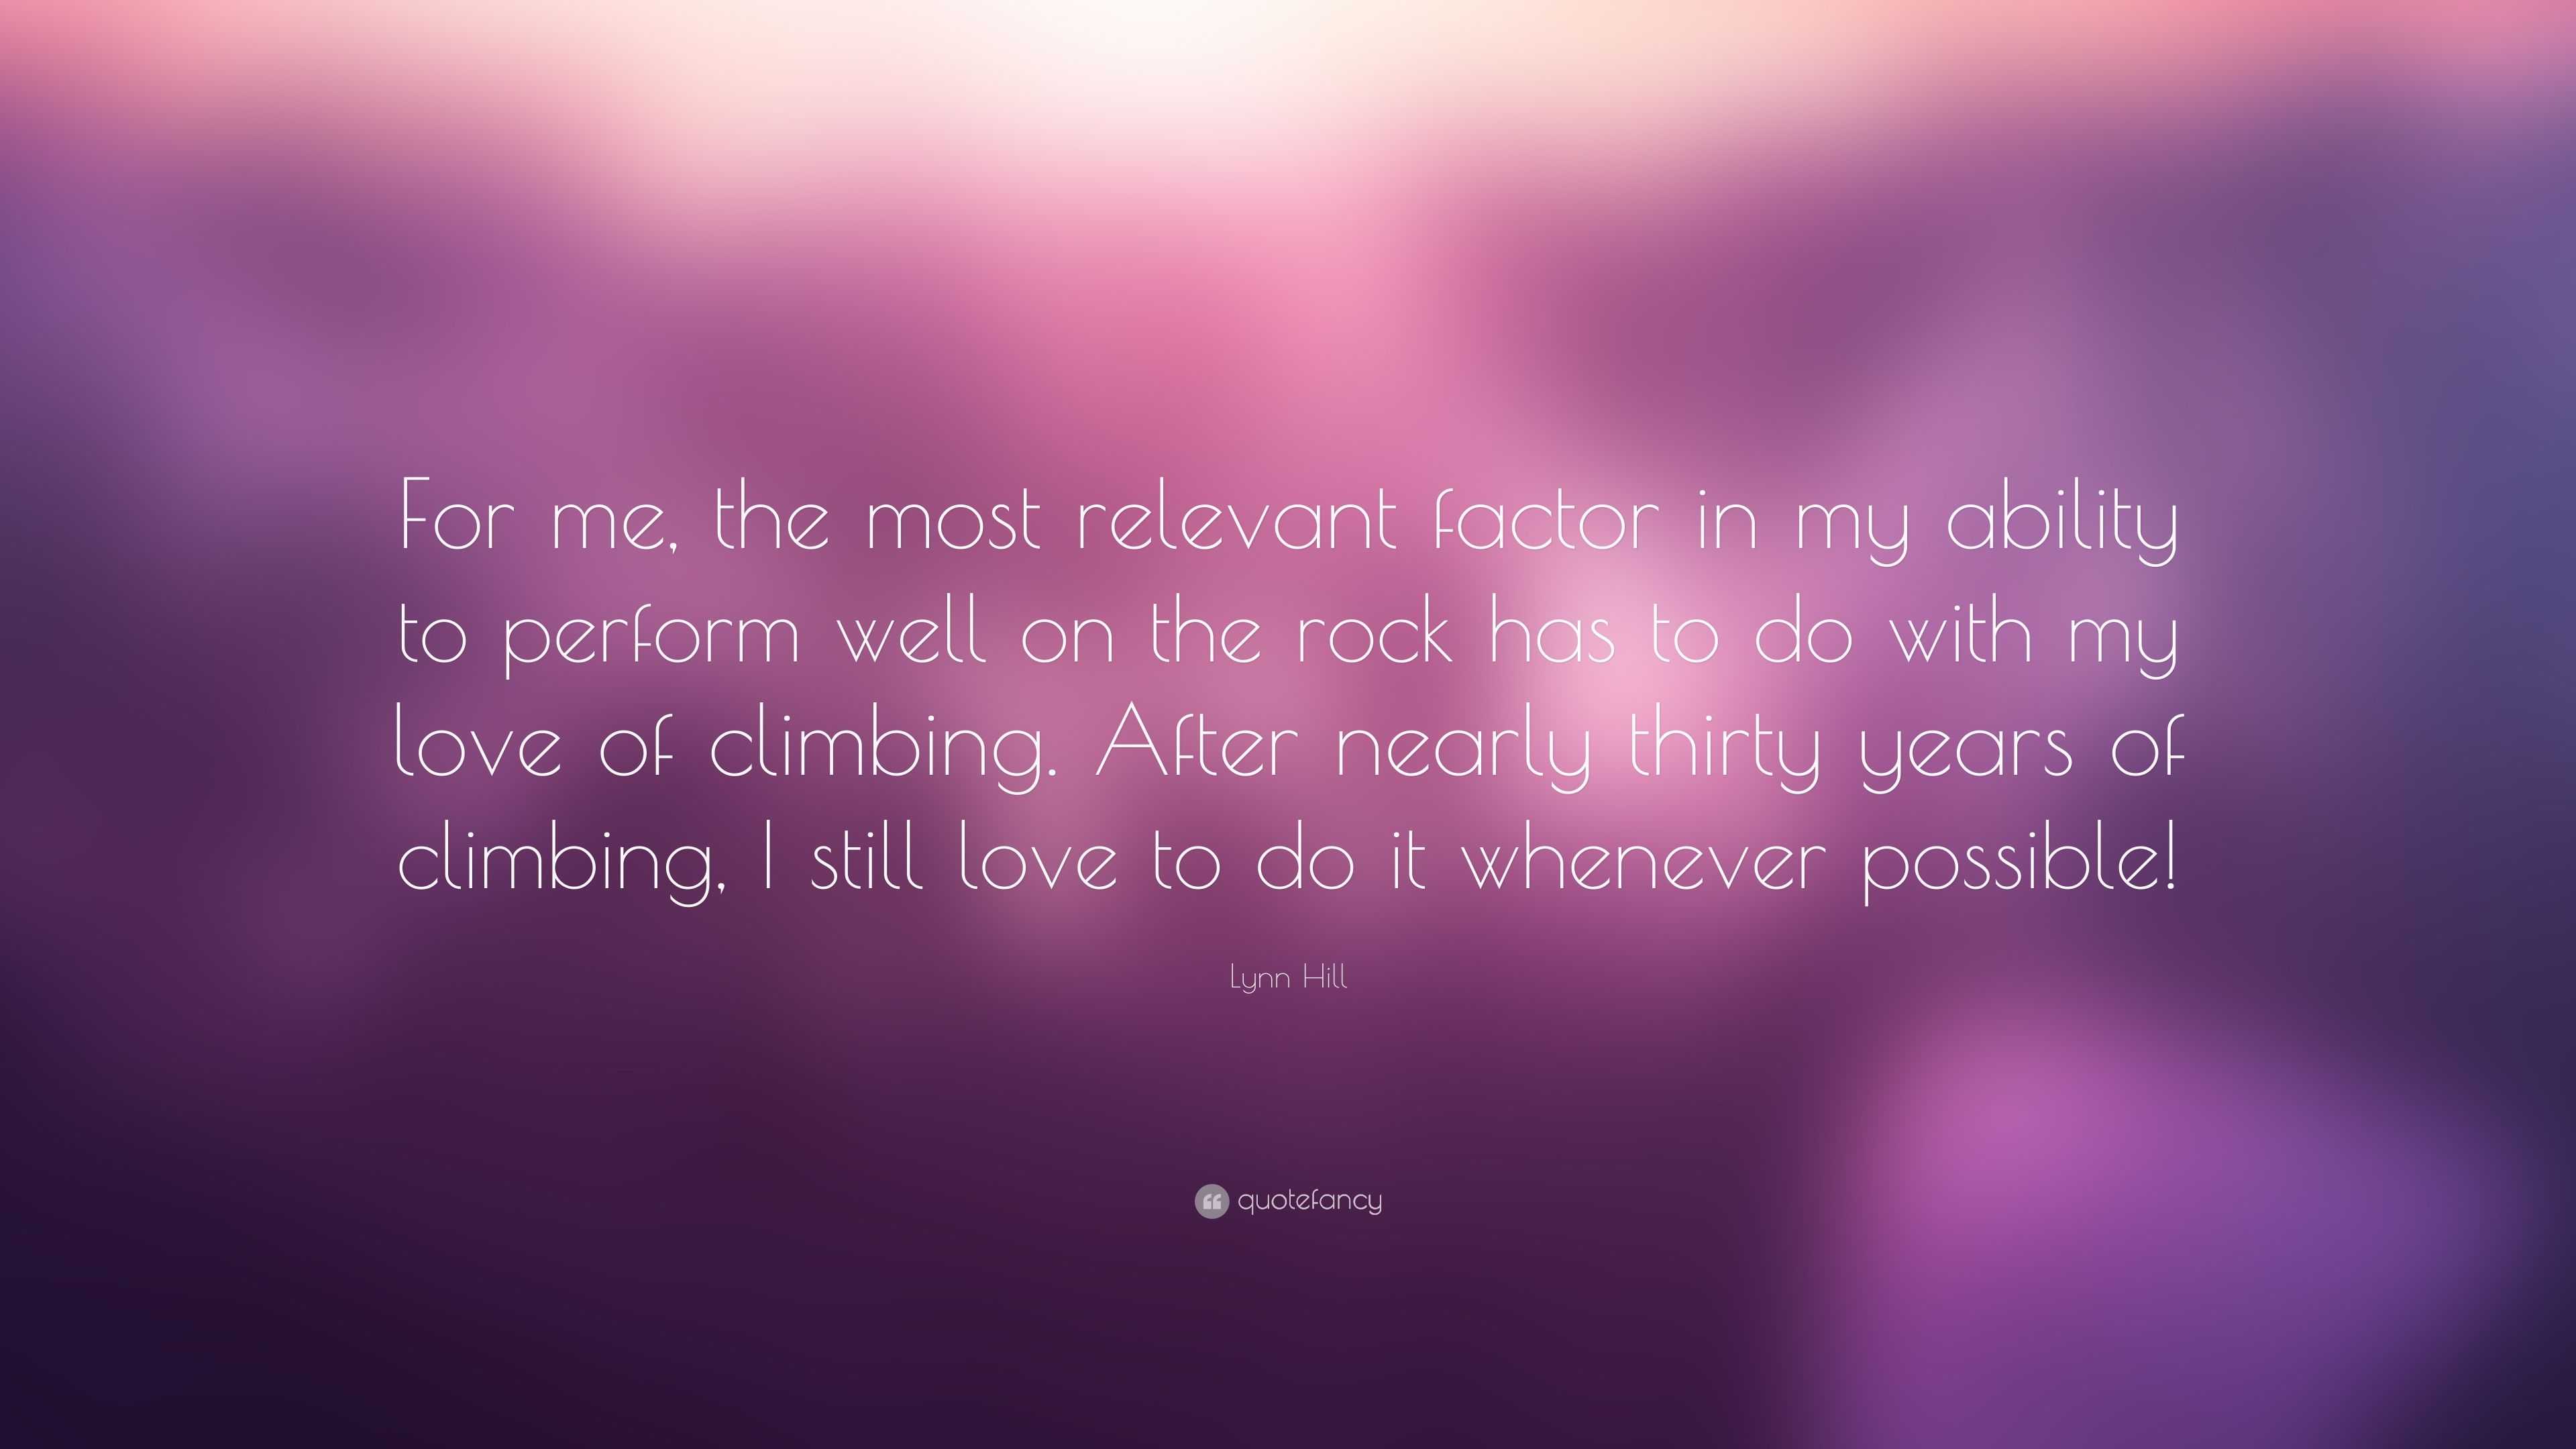 Lynn Hill Quote: “For me, the most relevant factor in my ability to ...